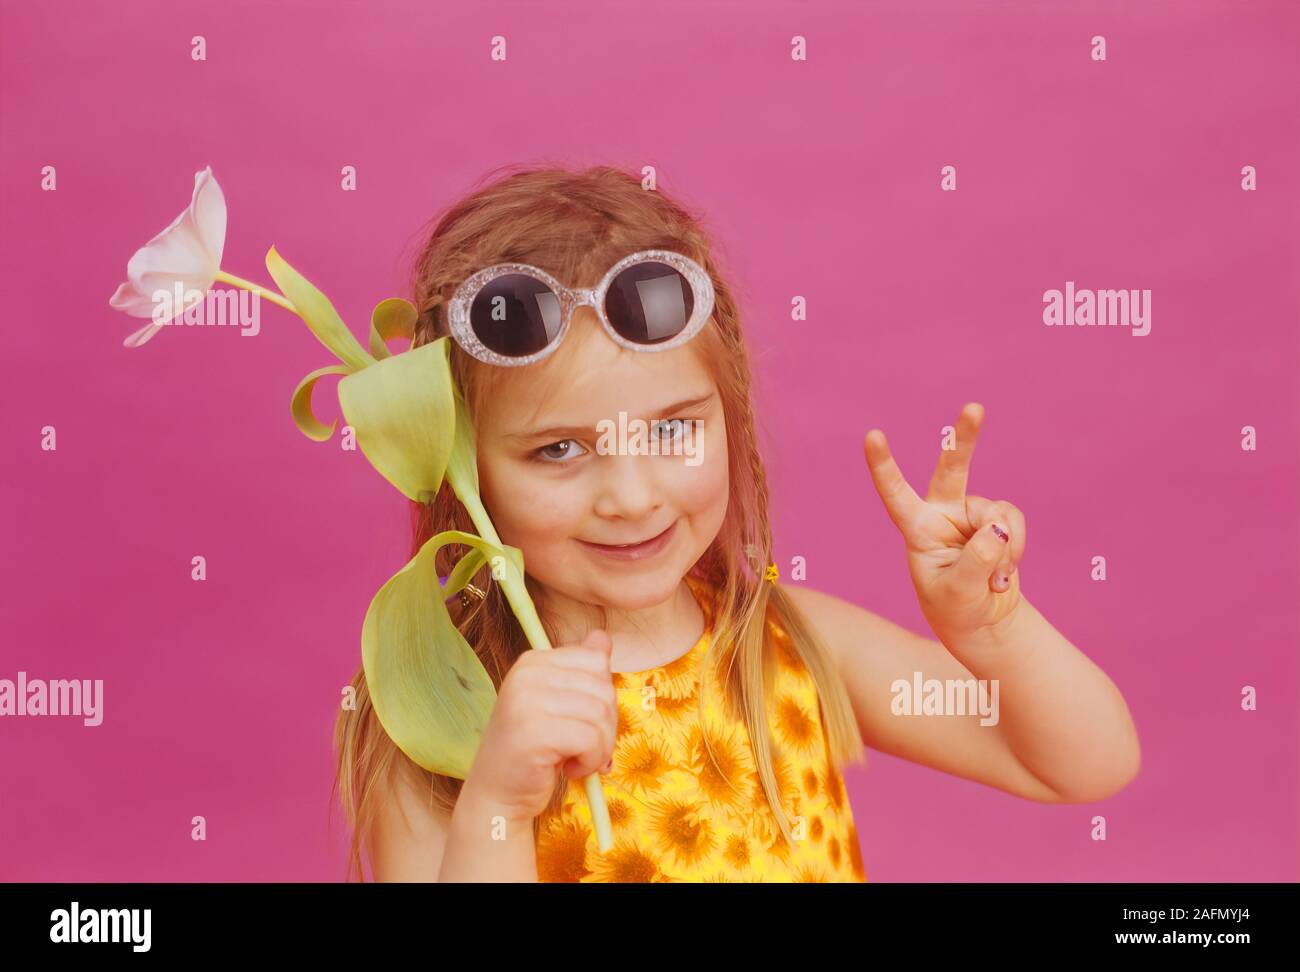 Young Girl in a Sixties, hippe peace and flower pose Stock Photo